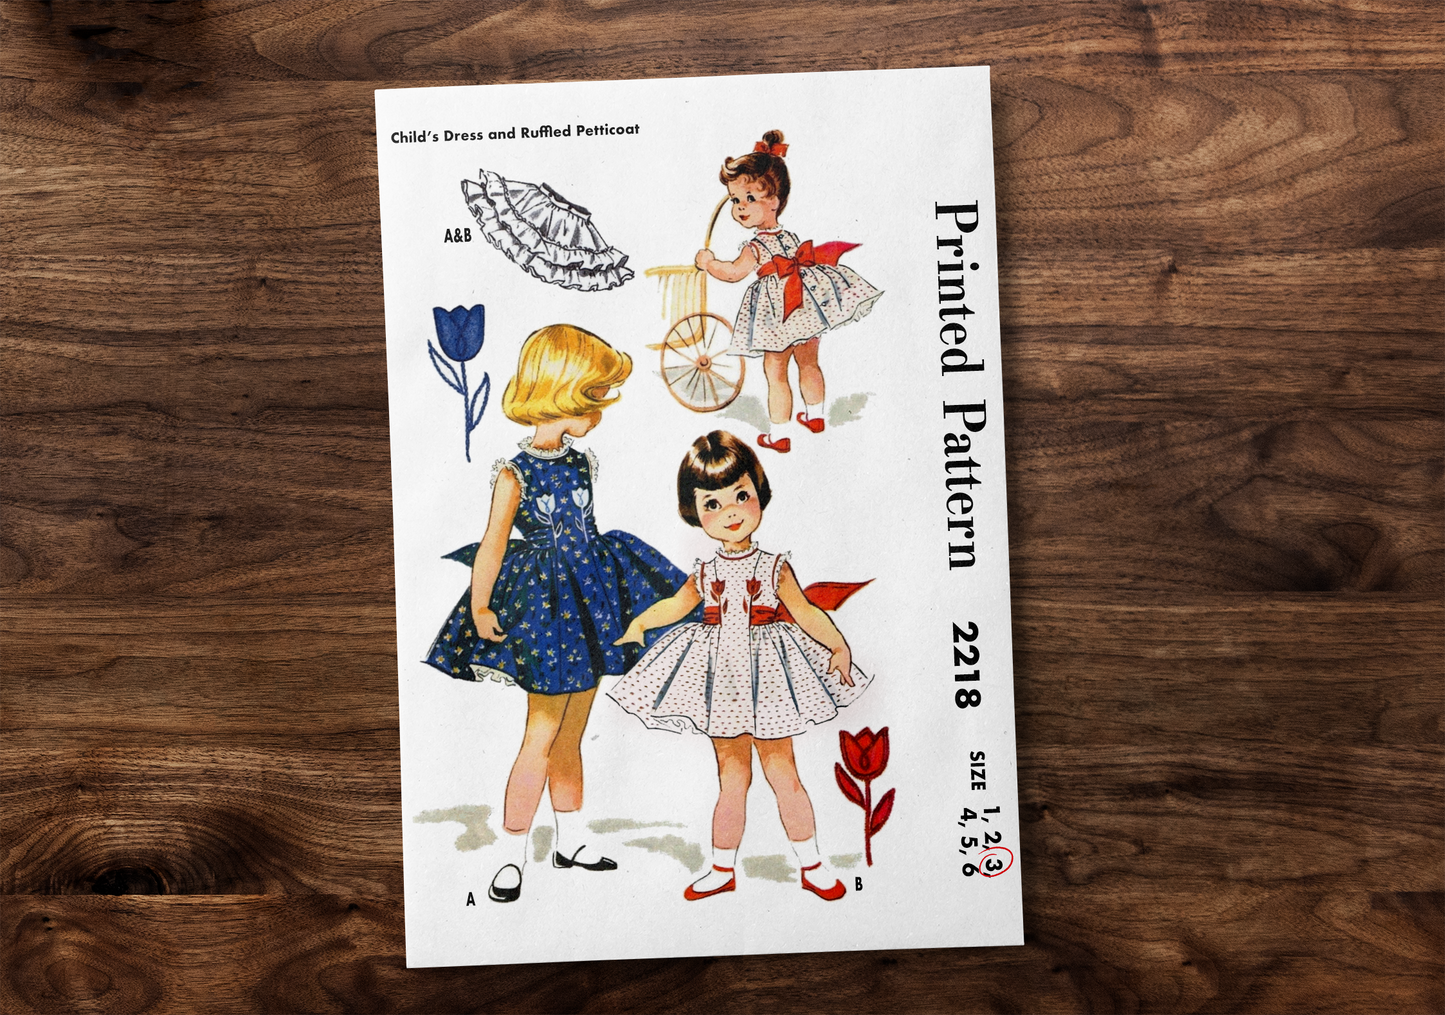 2218MC - Girls 1950s Summer Dress with petticoat - Toddler Child - *REPRODUCTION* - Available sizes: 1, 2, 3, 4, 5, 6